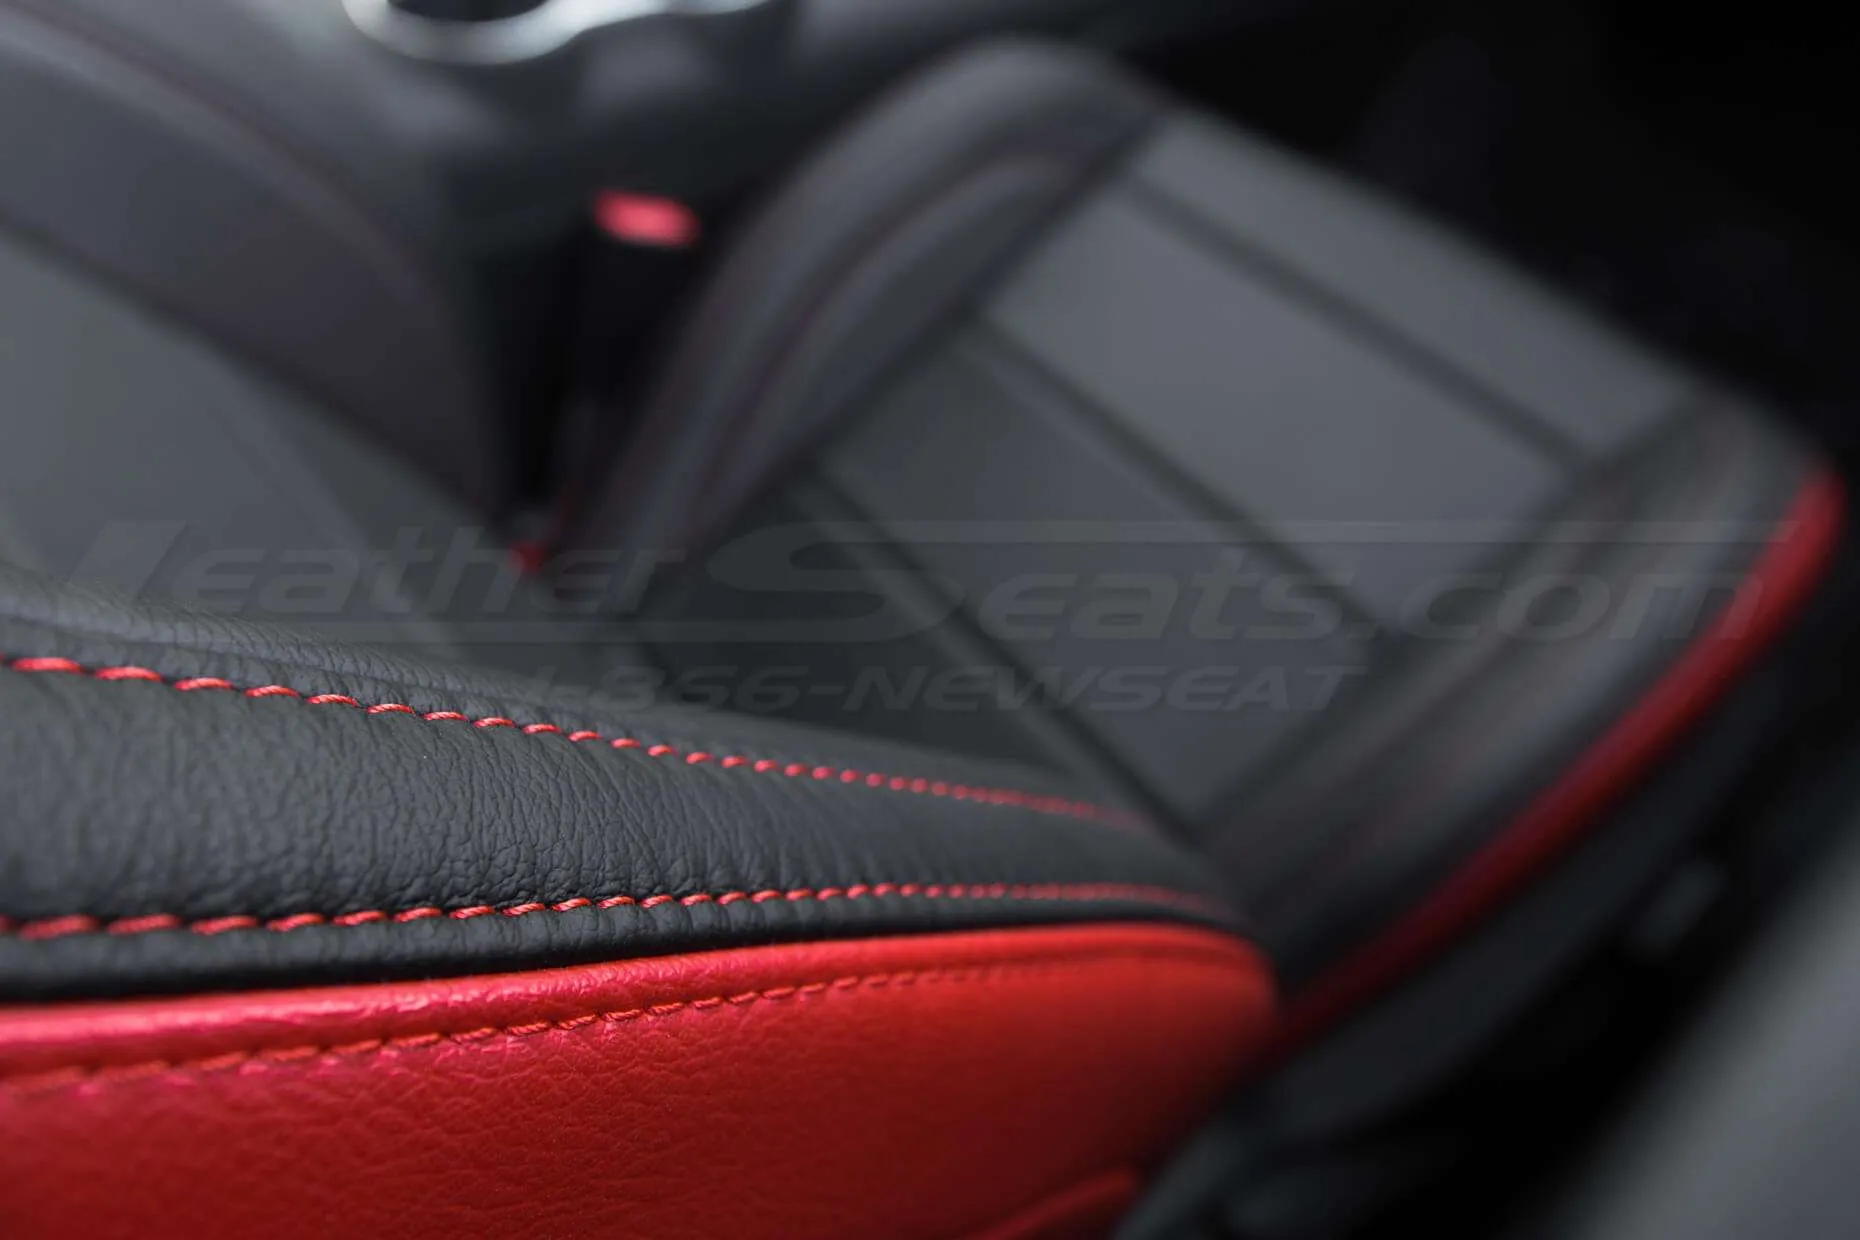 2015-2021 Ford Mustang Leather Upholstery Kit - Black & Bright Red - Installed - Side double-stitching close up